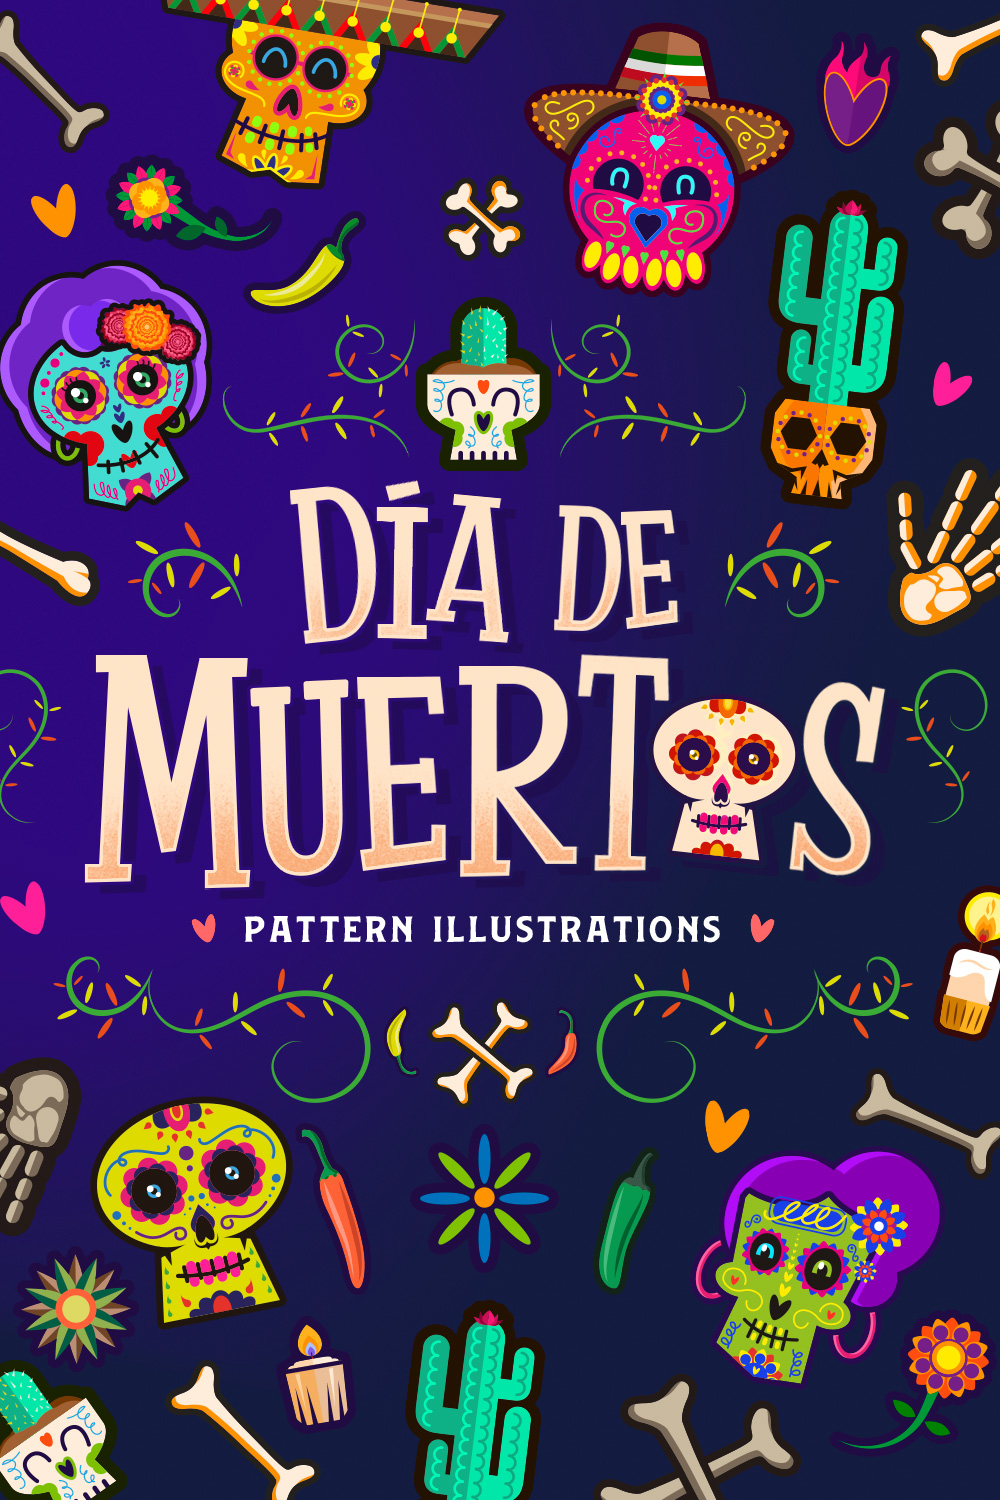 Day of The Dead Pattern Illustration Pinterest image.